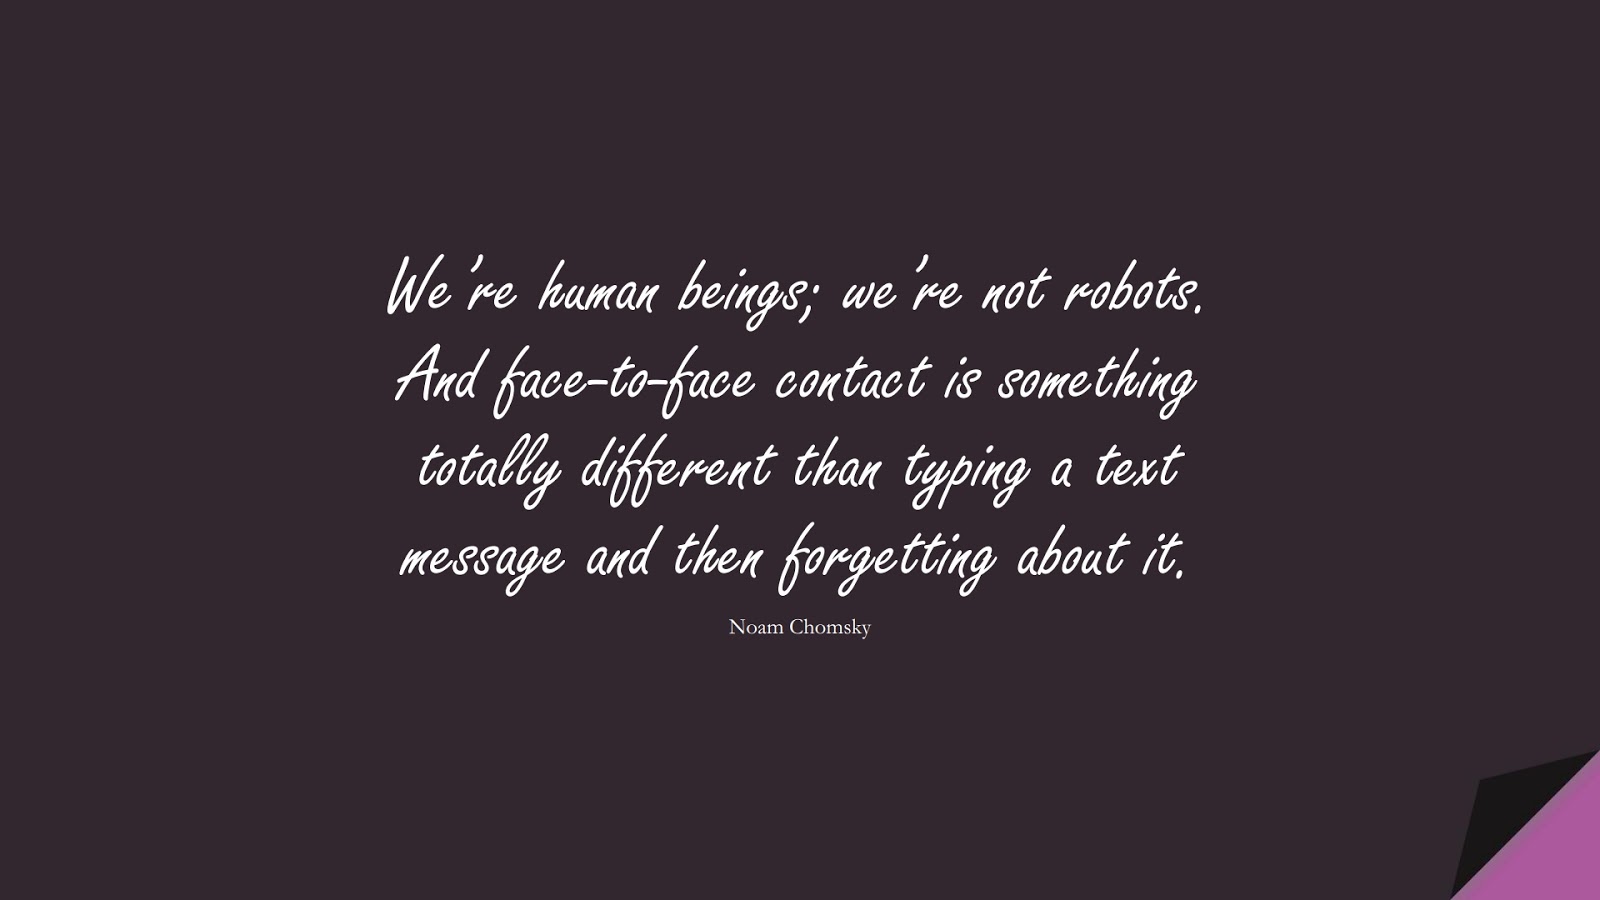 We’re human beings; we’re not robots. And face-to-face contact is something totally different than typing a text message and then forgetting about it. (Noam Chomsky);  #RelationshipQuotes